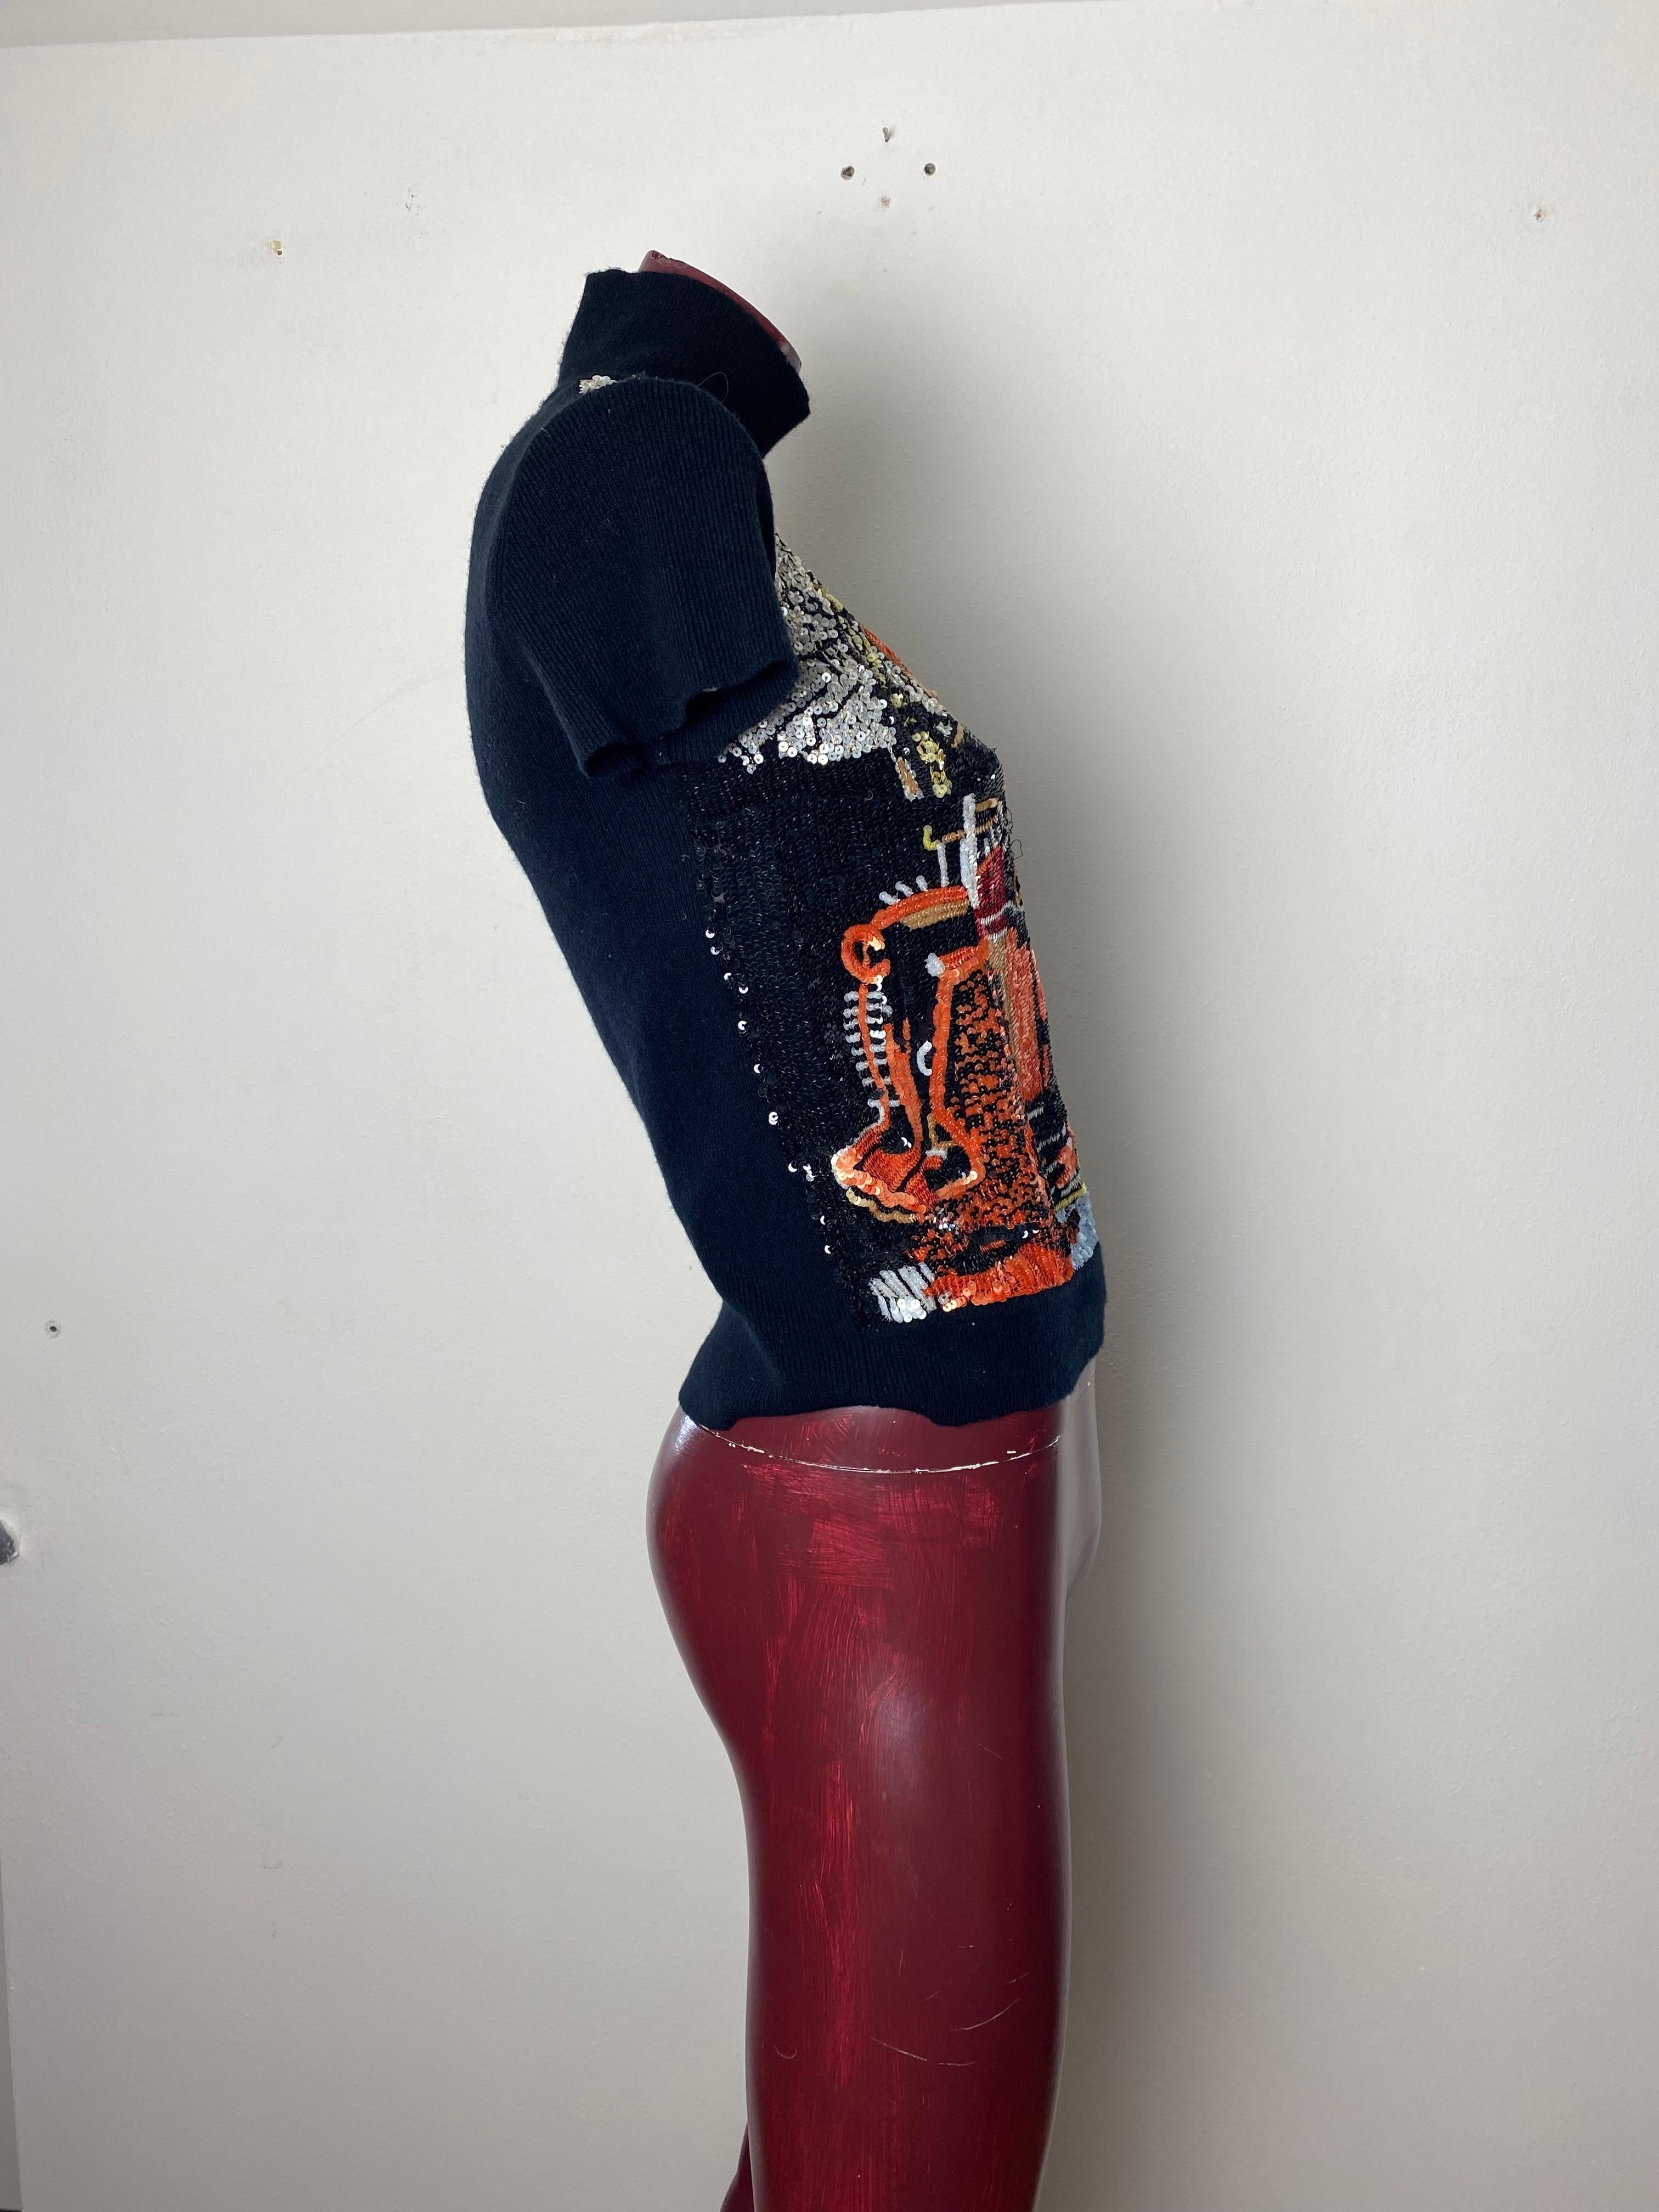 Valentino turtleneck with wonderful pailletes embroidery Basquiat picture For Sale 2